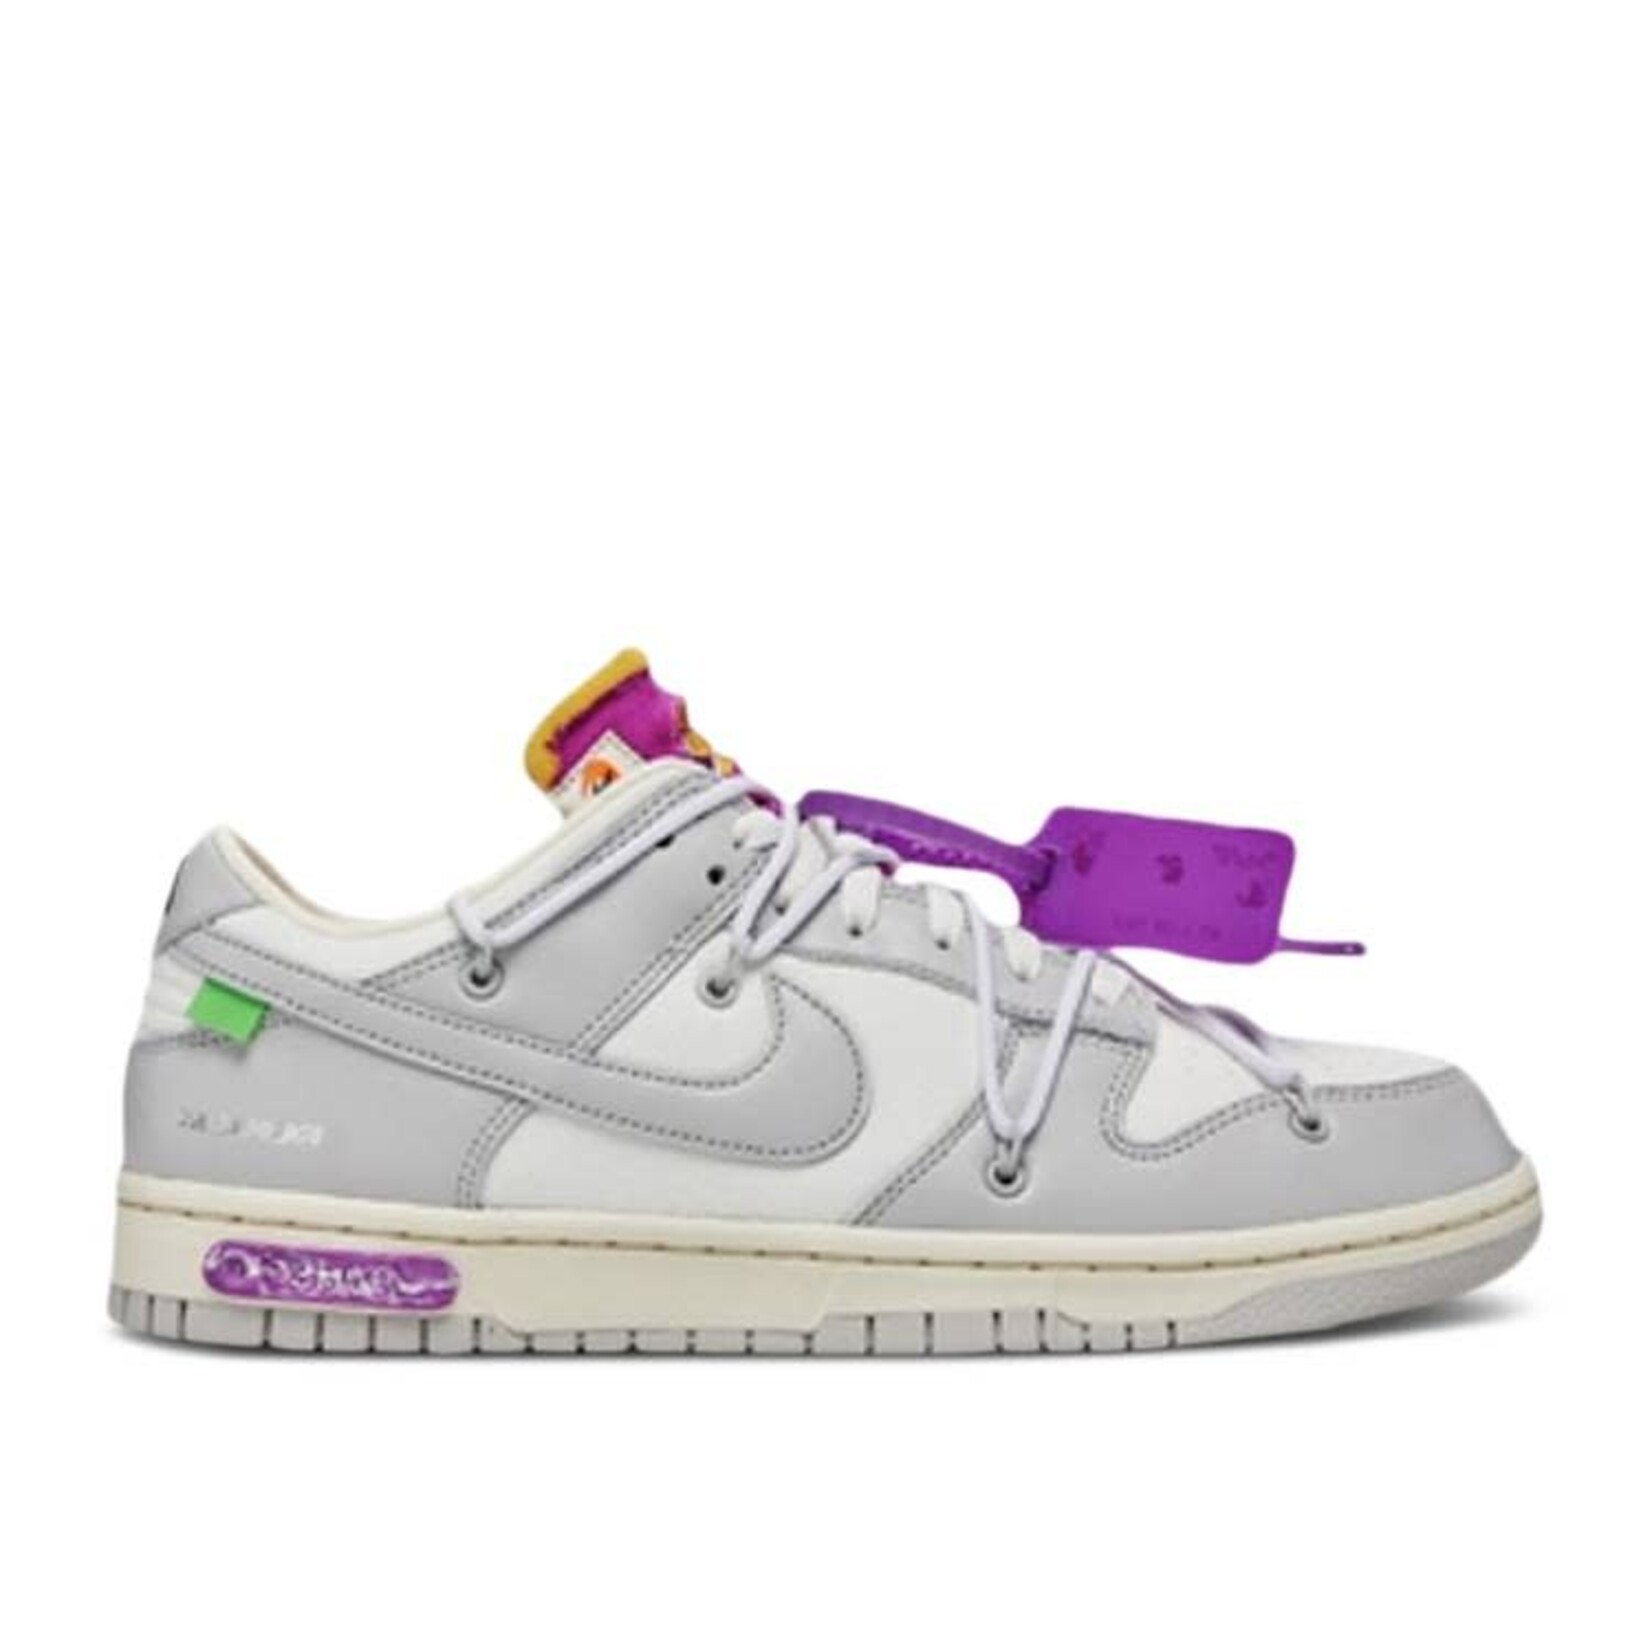 Nike Nike Dunk Low Off-White "Lot 3" Size 8, DS BRAND NEW